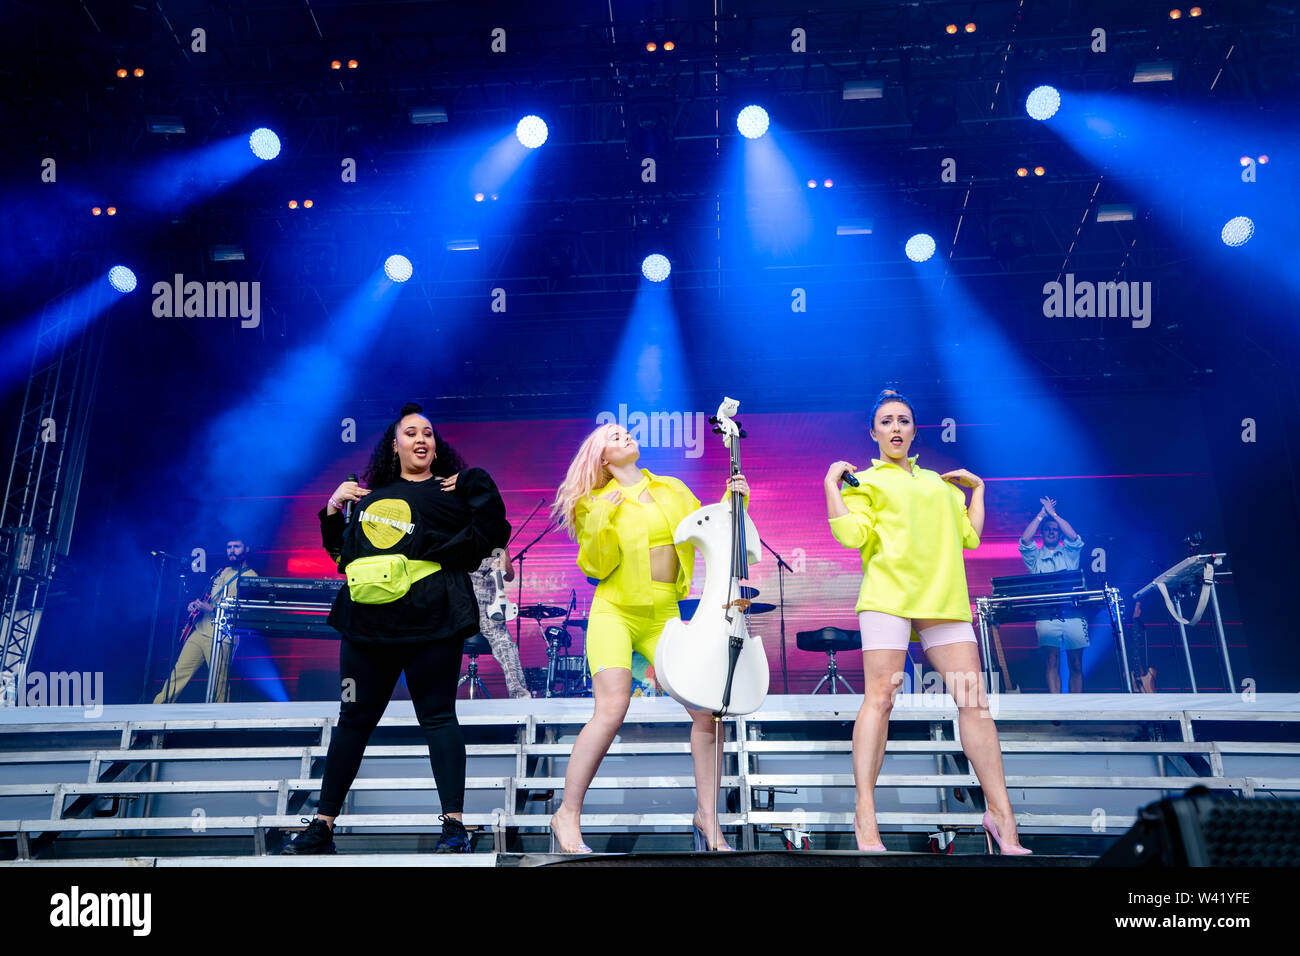 Bergen, Norway - June 14th, 2019. The British electronic music group Clean Bandit performs a live concert during the Norwegian music festival Bergenfest 2019 in Bergen. Here cellist Grace Chatto (C) is seen live on stage with singer Yasmin Green (L) and Kirsten Joy (R). (Photo credit: Gonzales Photo - Jarle H. Moe). Stock Photo